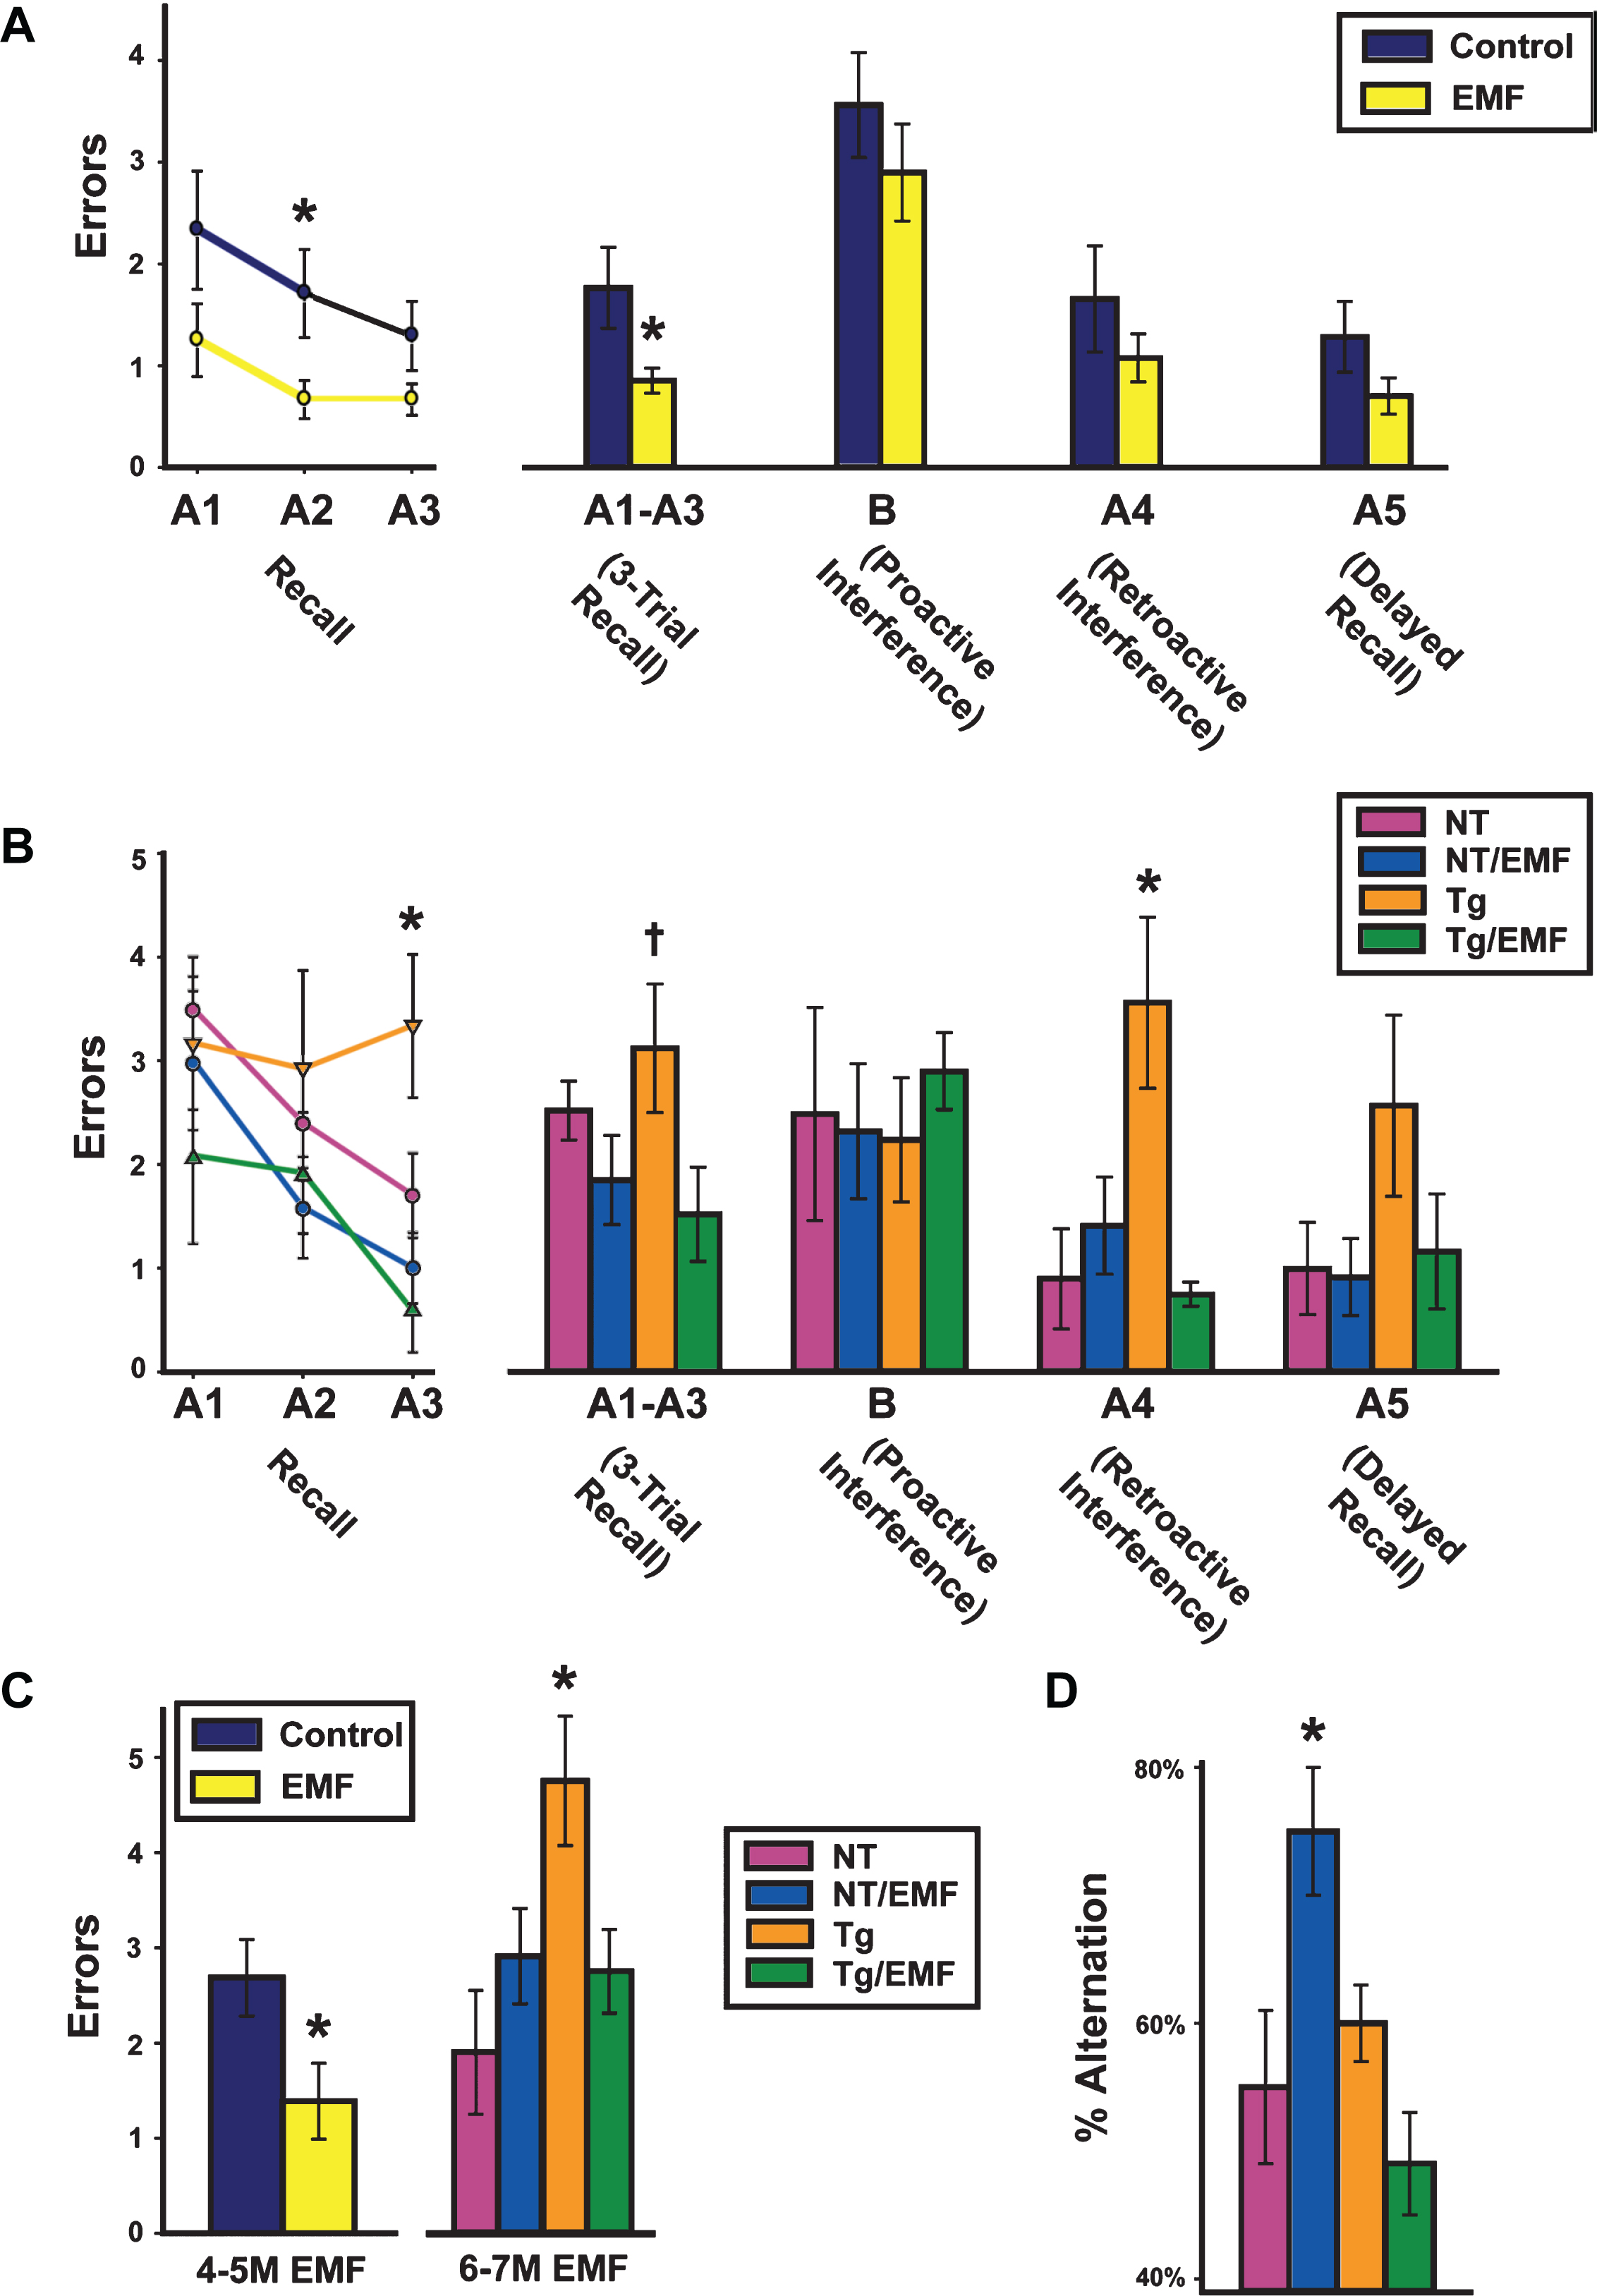 EMF treatment, begun in young adulthood, 
protects AD mice (Tg) mice from cognitive impairment and improves basic memory of normal mice. Cognitive 
interference testing at 4-5 months (A) and 6-7 months (B) into EMF treatment revealed overall [Tg and non-Tg(NT) 
animals combined] cognitive benefits at the initial test point and cognitive protection of Tg mice at the later 
test point during the first of two test Blocks. C) Proactive interference testing during Block 2 revealed both 
overall benefit (at 4-5 M) and cognitive protection of Tg mice (at 6-7M). *p < 0.05 versus other group(s) at same time point; †p < 0.05 versus Tg/EMF group. D) Normal (NT) mice at 6-7 months into EMF treatment showed superior Y-maze spontaneous alternation. *p < 0.05 versus all other groups.